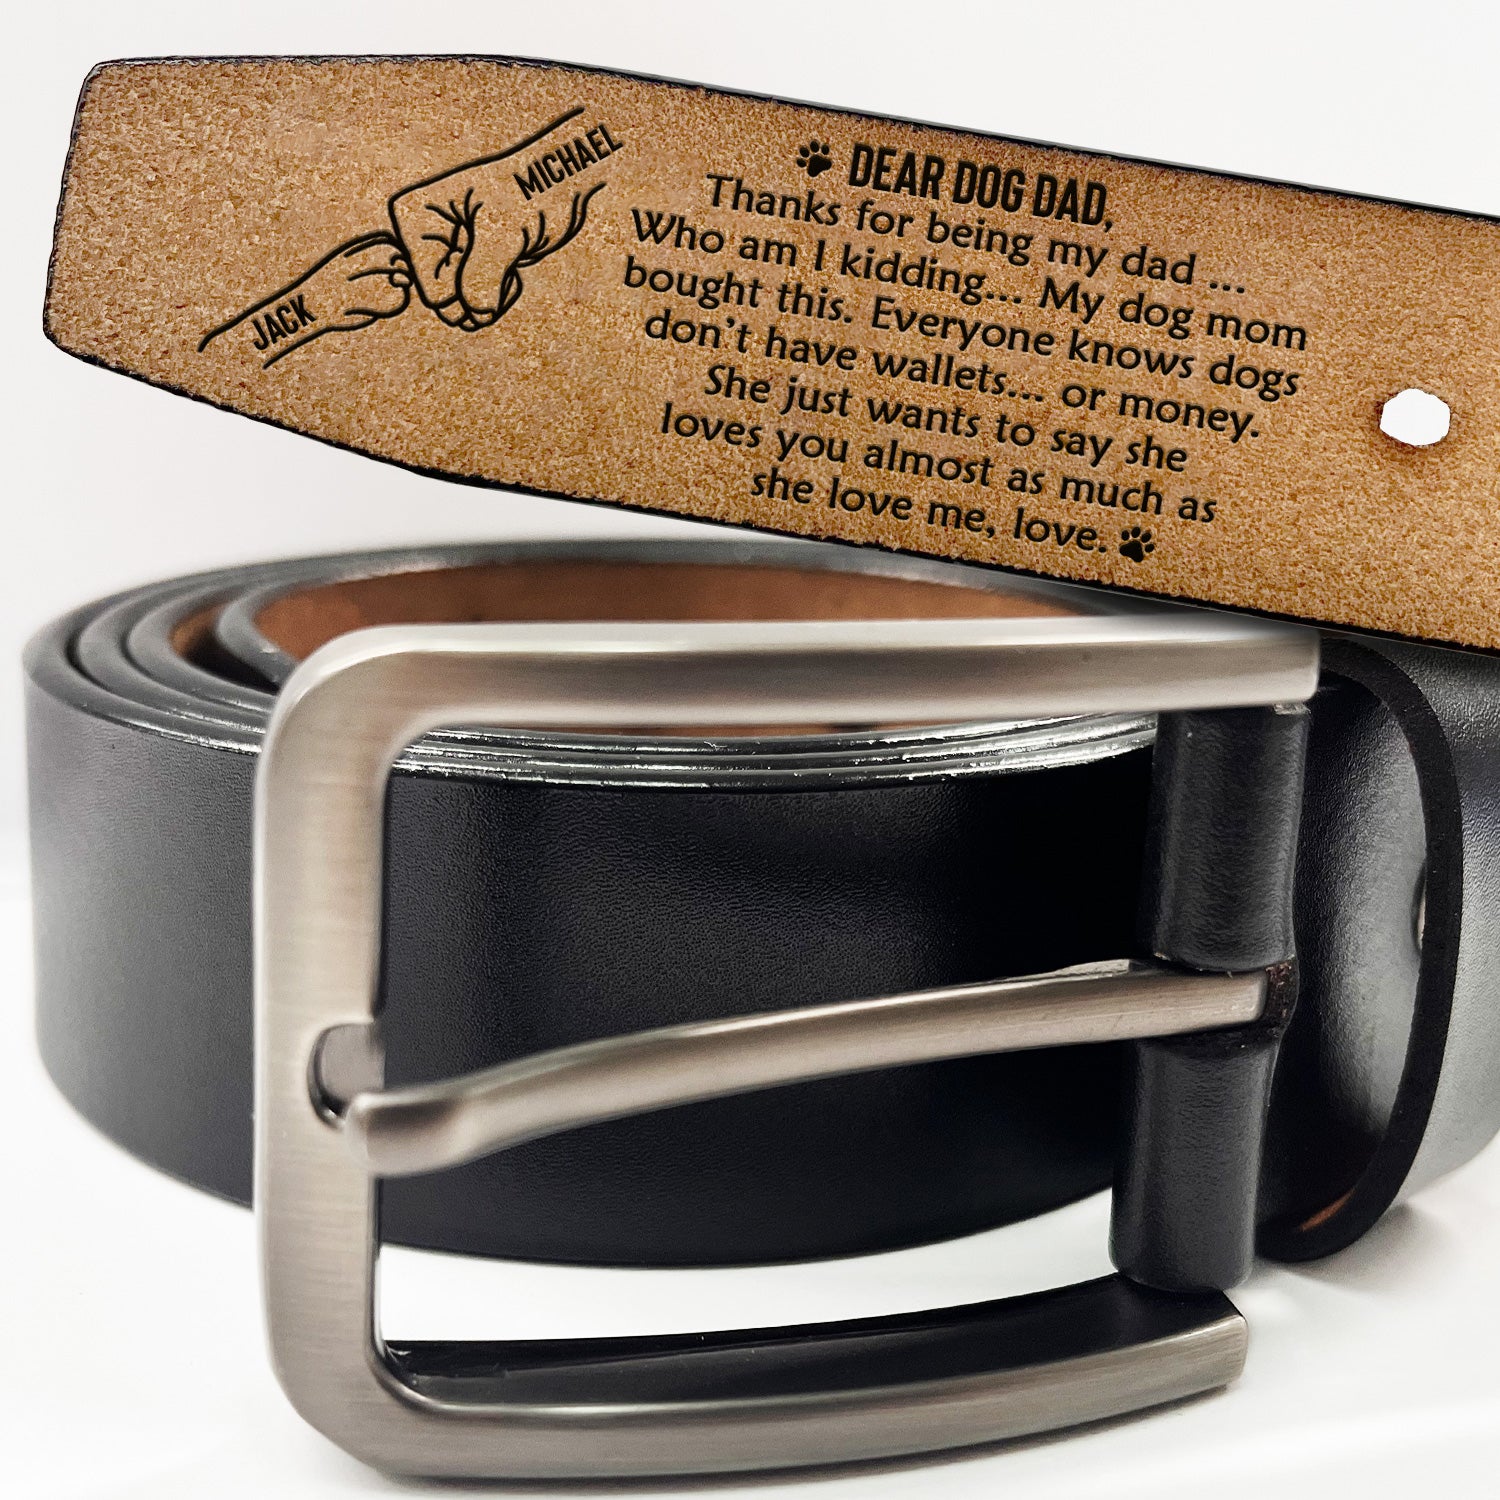 Thanks For Being My Dad - Gift For Dog Dad - Personalized Engraved Leather Belt